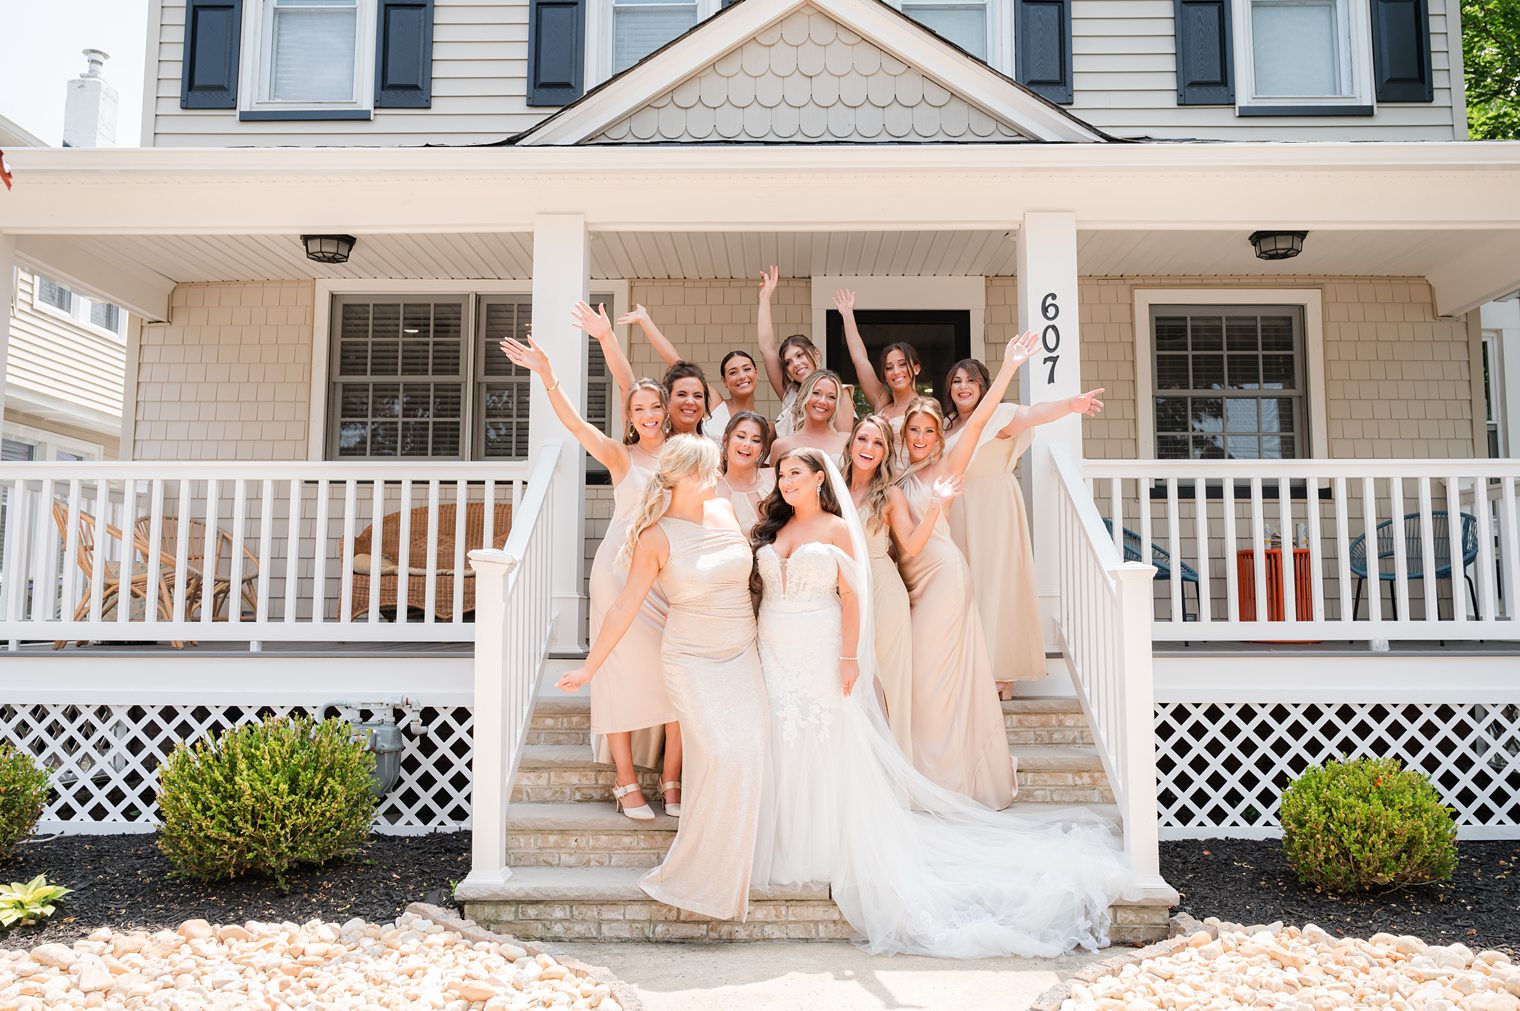 Bride with her bridesmaids celebrating the big day